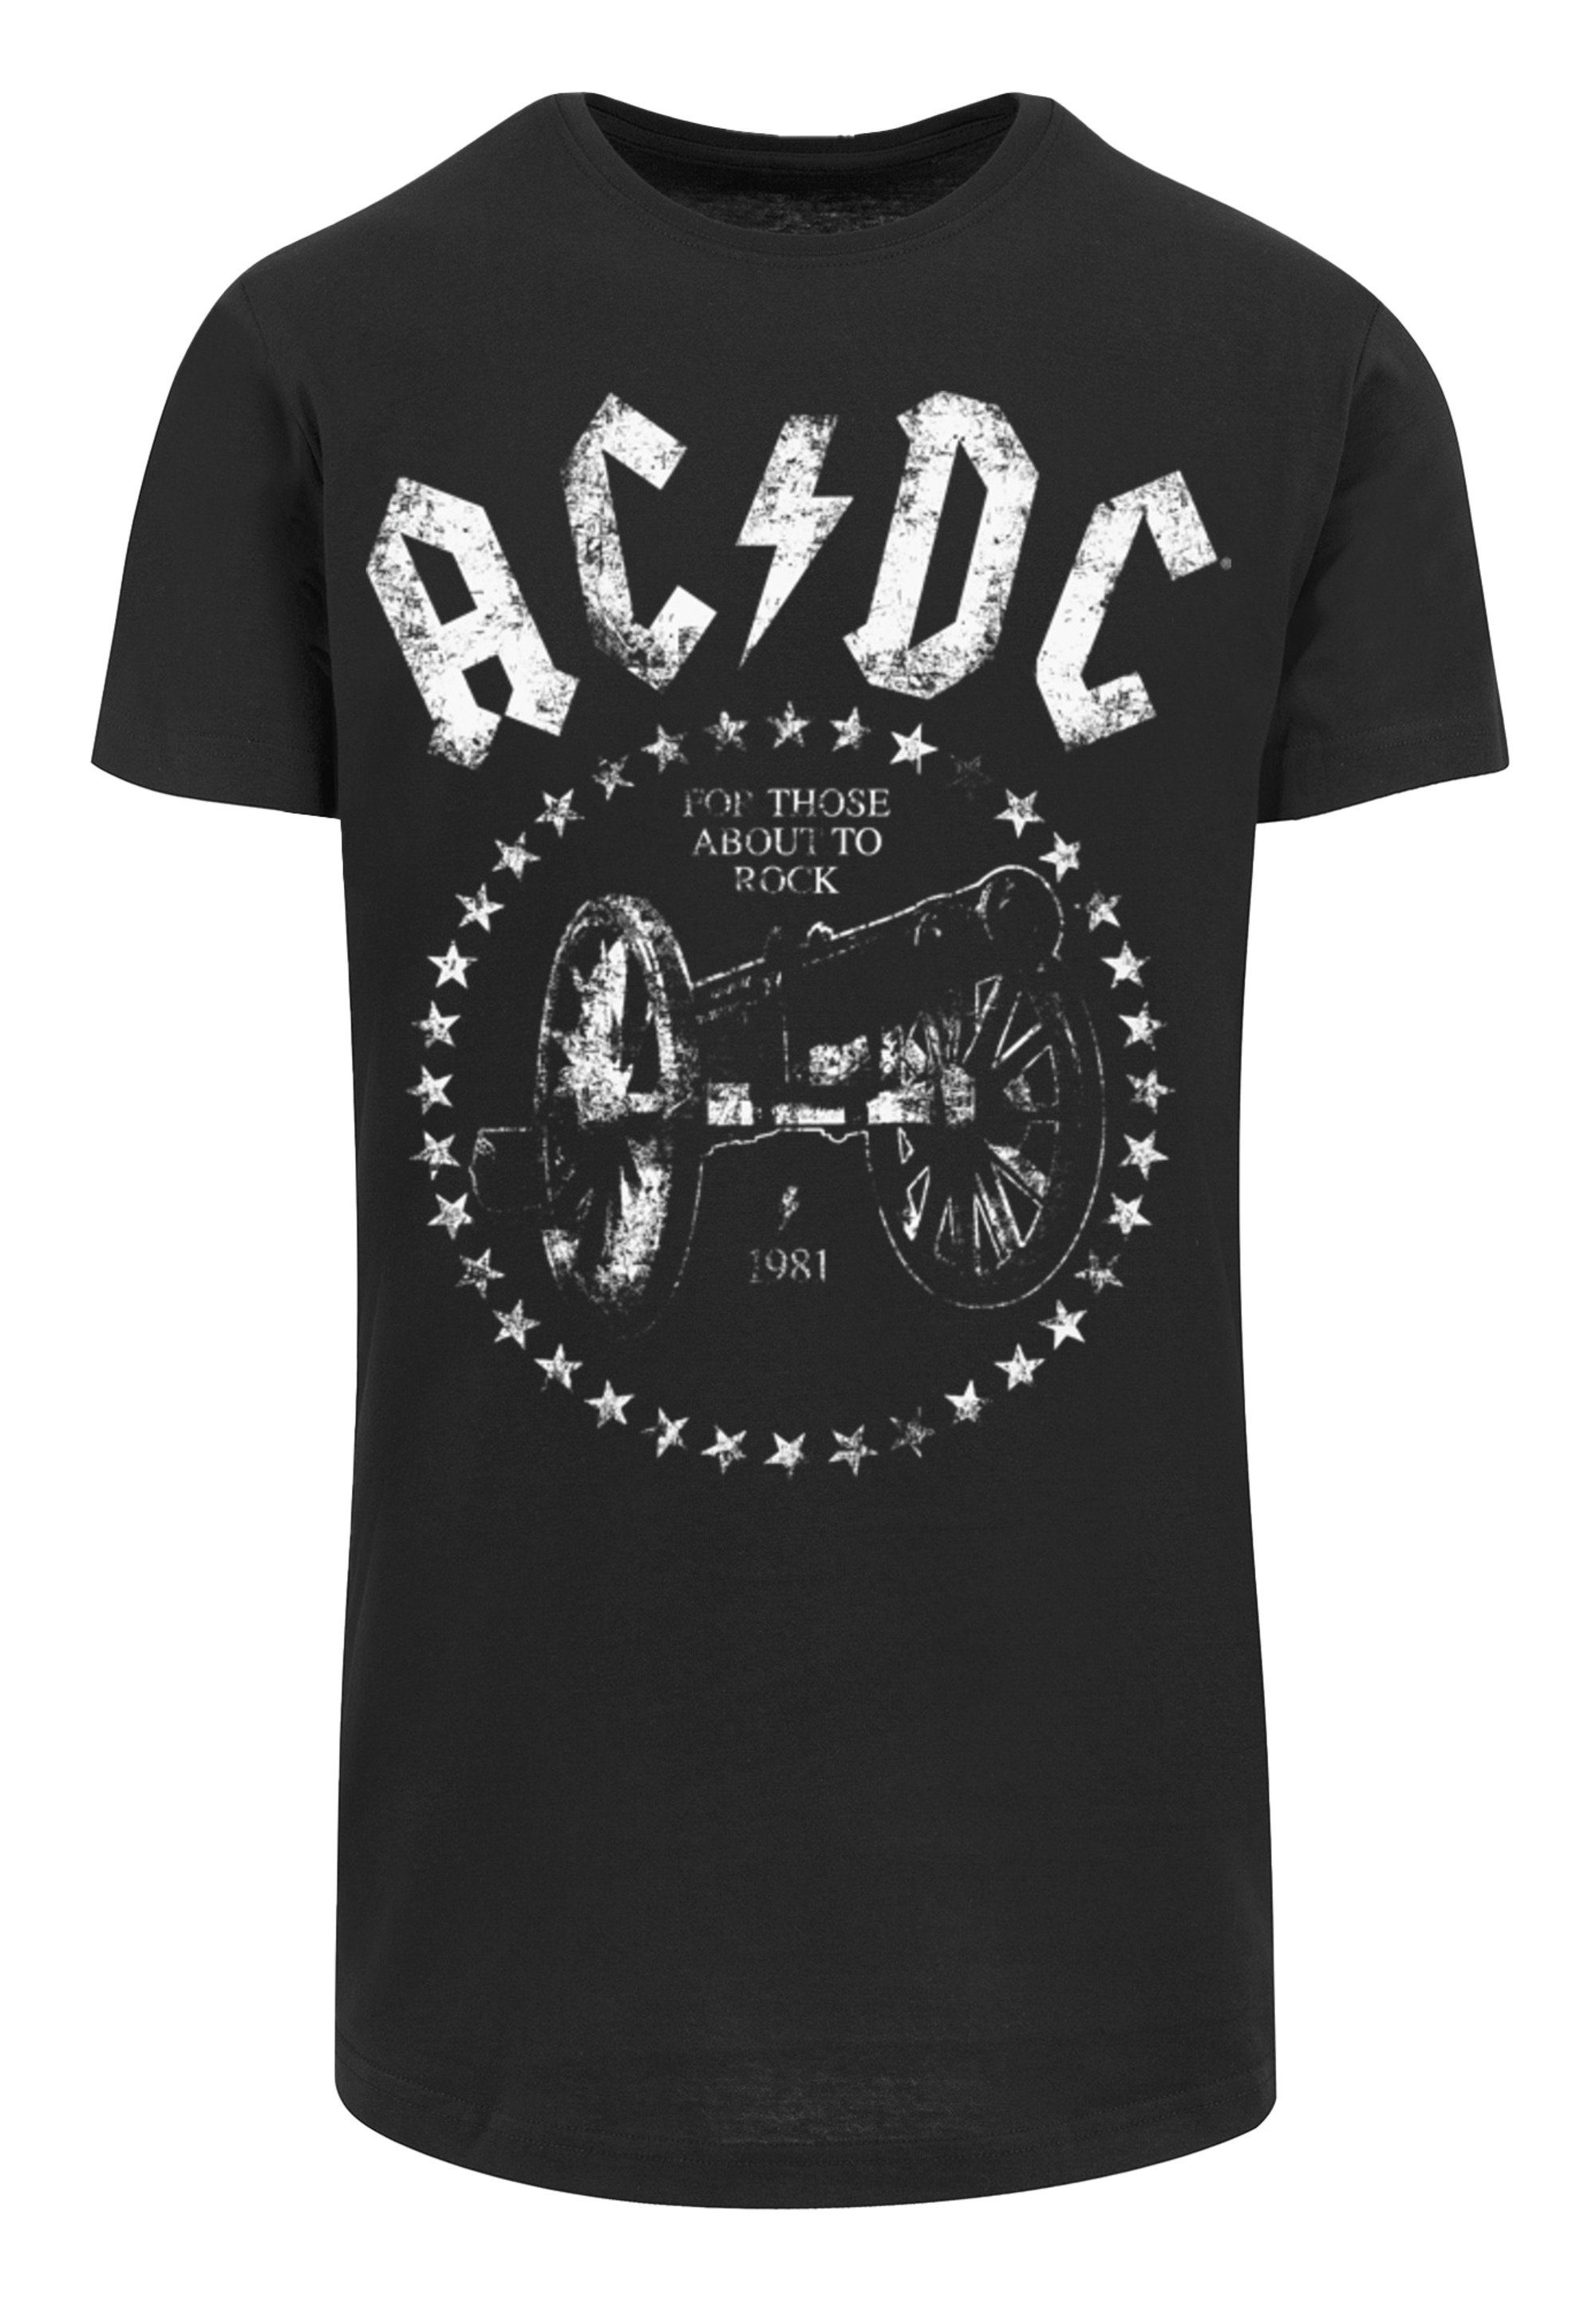 F4NT4STIC T-Shirt We Cannon SIZE Salute PLUS Print You ACDC